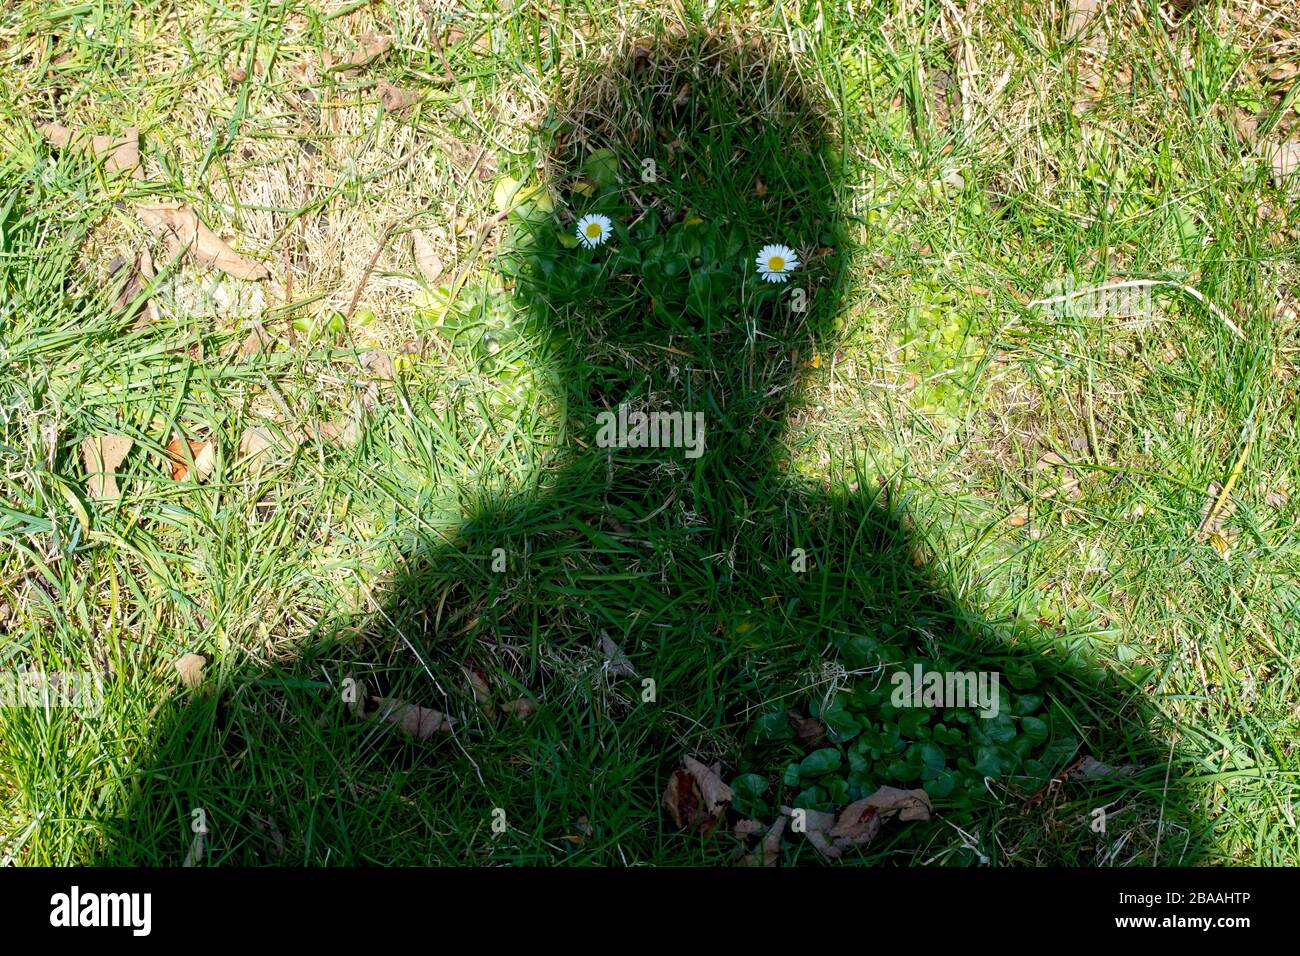 A shadowman, the result of a weird juxtaposition of objects and timing. He looks menacing and intimidatory or sad and furlorn, depending on your mood. Stock Photo